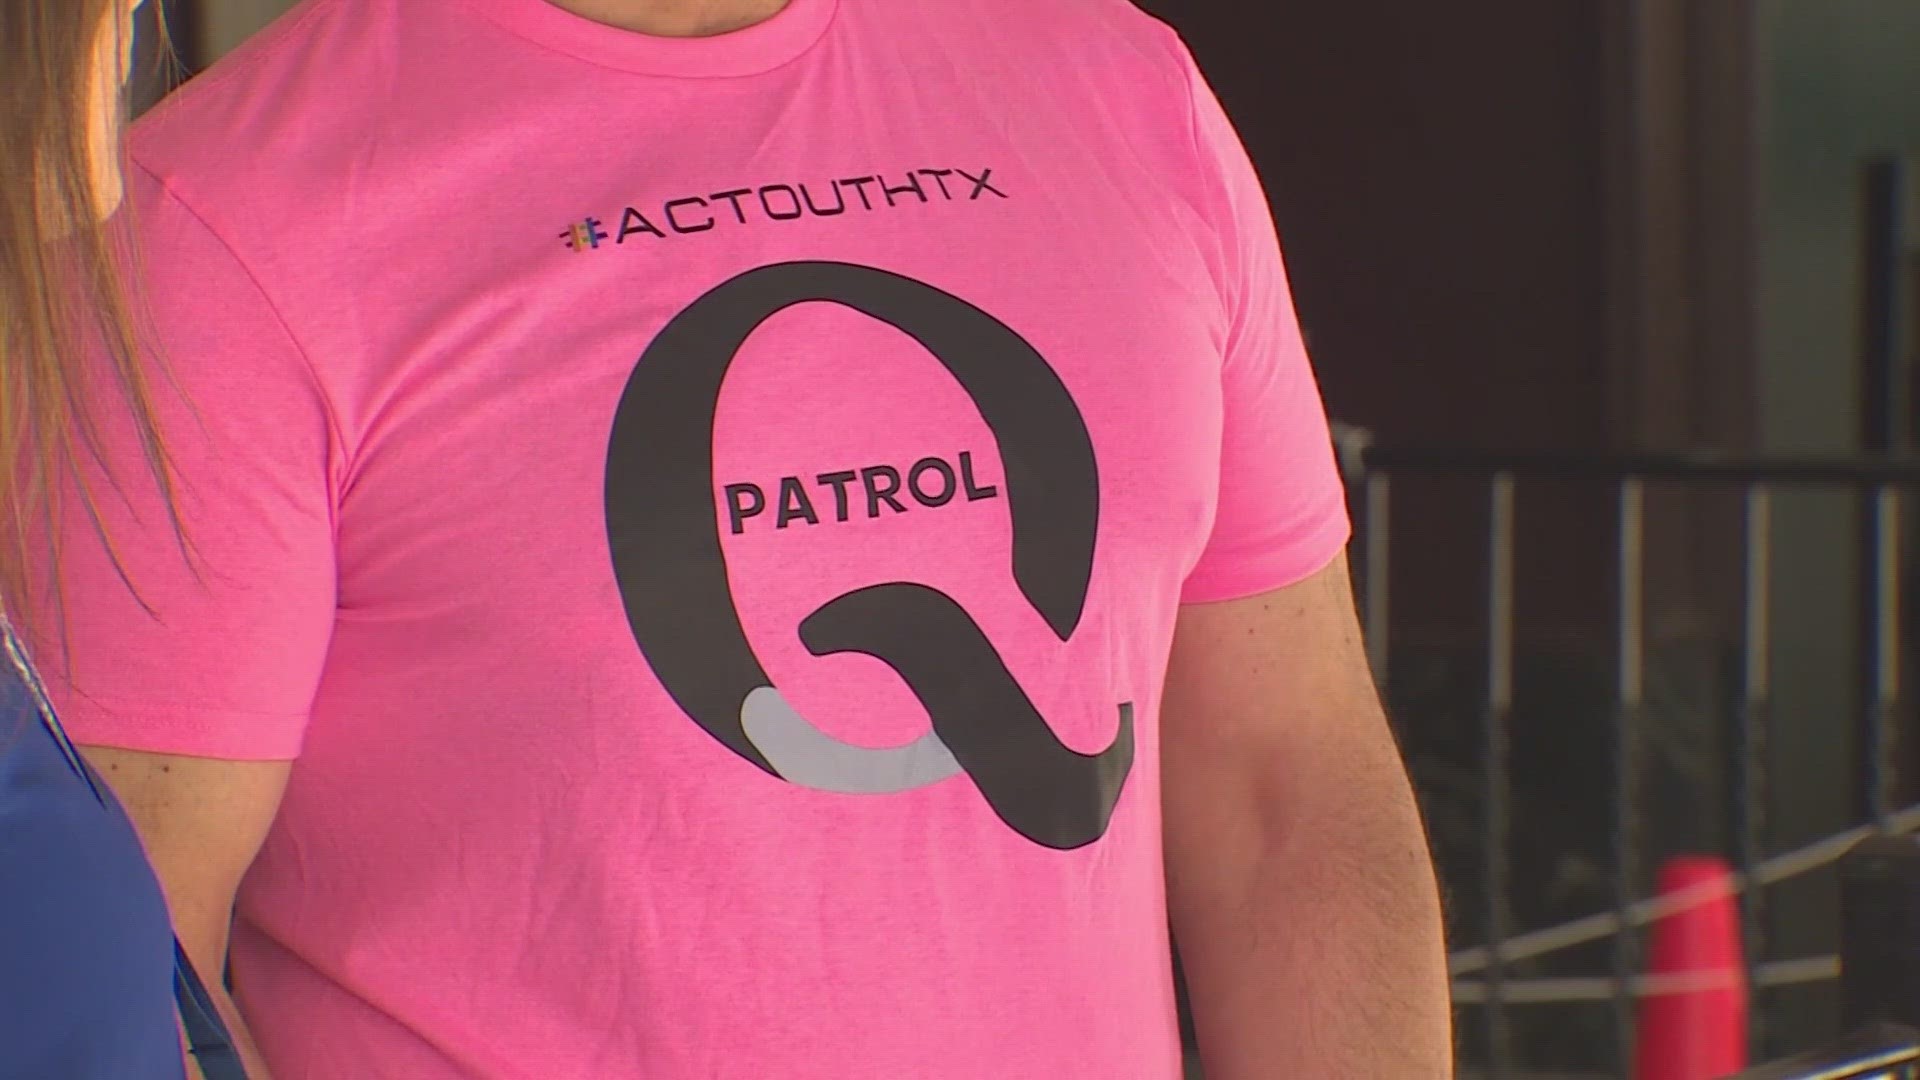 Q-Patrol began in the 90s, but after police presence increased, they disbanded. Now, a new regime is taking over the safety efforts.